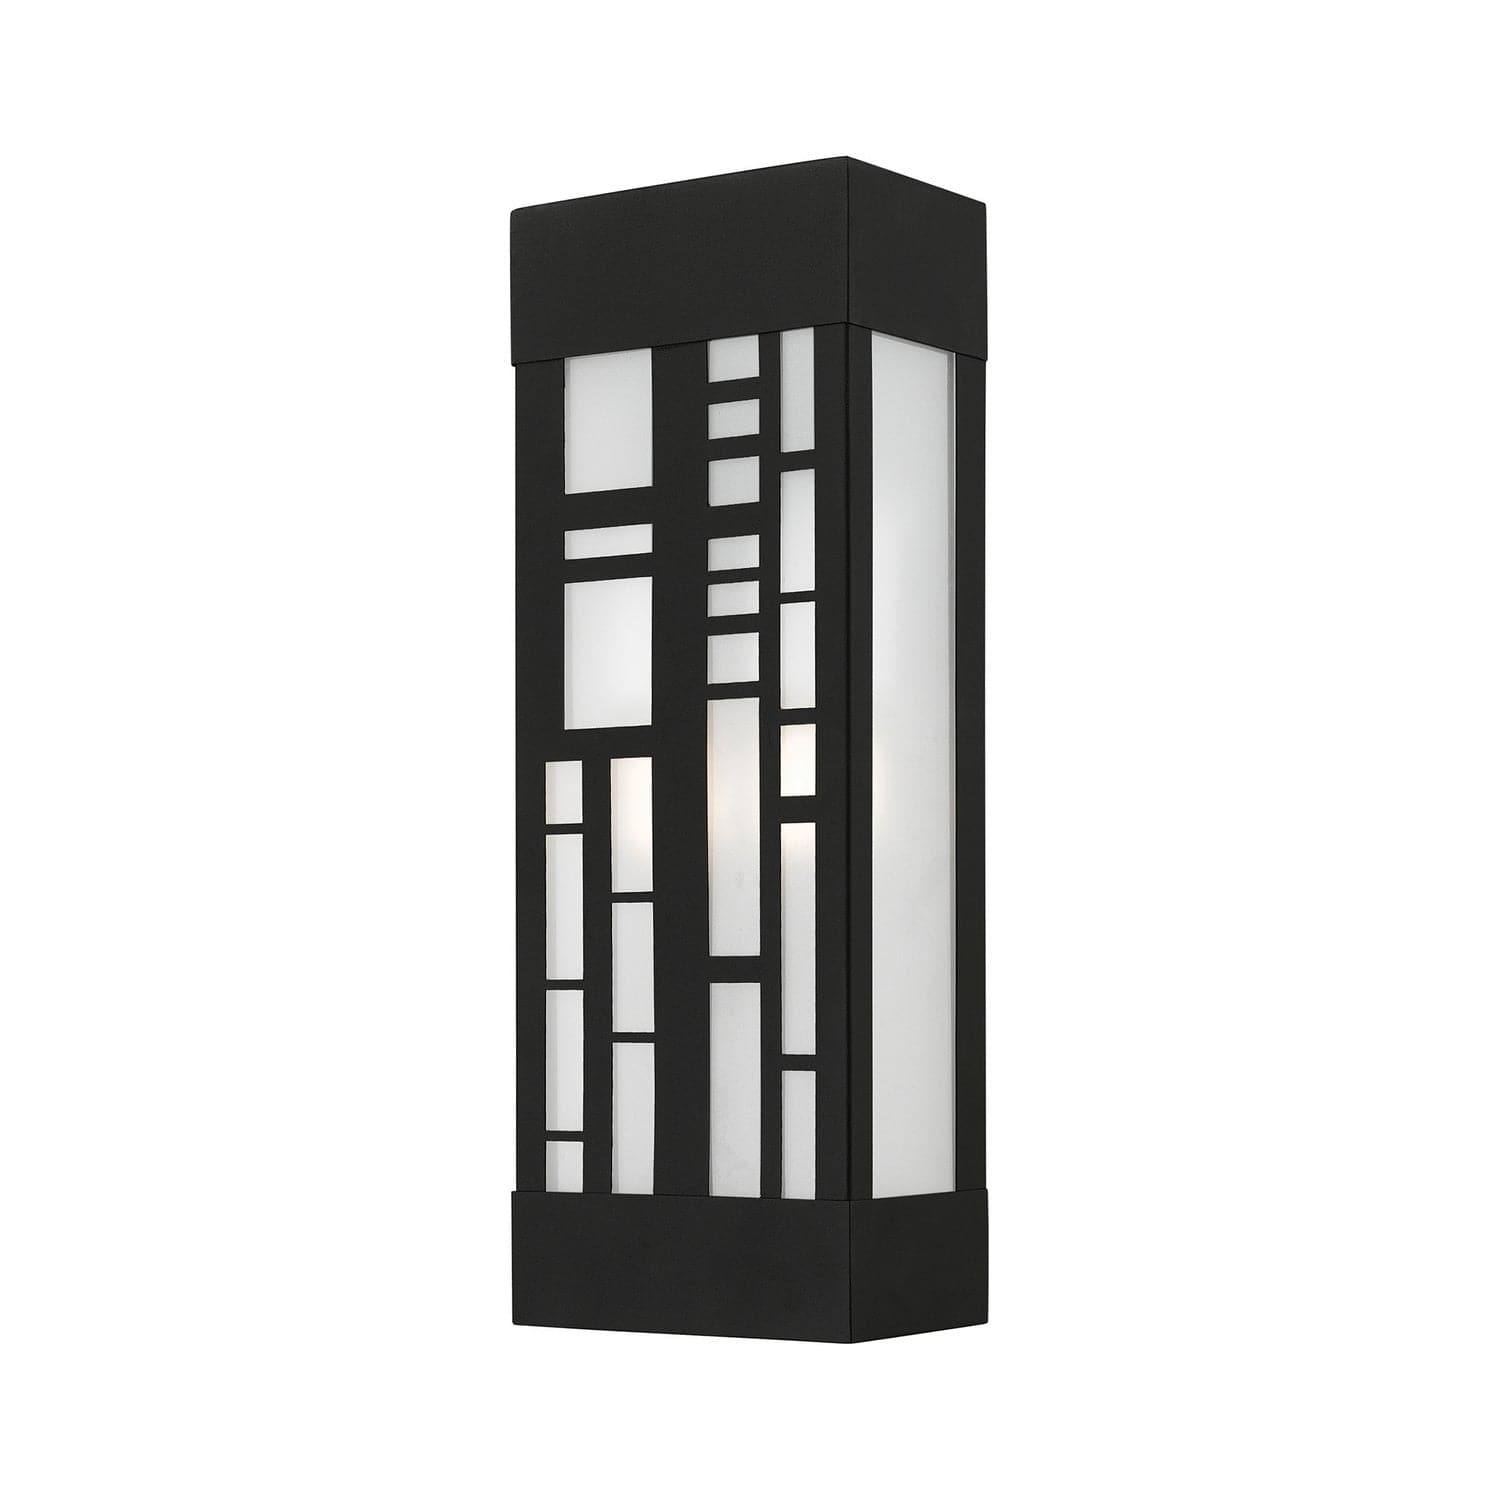 Livex Lighting - 22972-14 - Two Light Outdoor Wall Sconce - Malmo - Textured Black